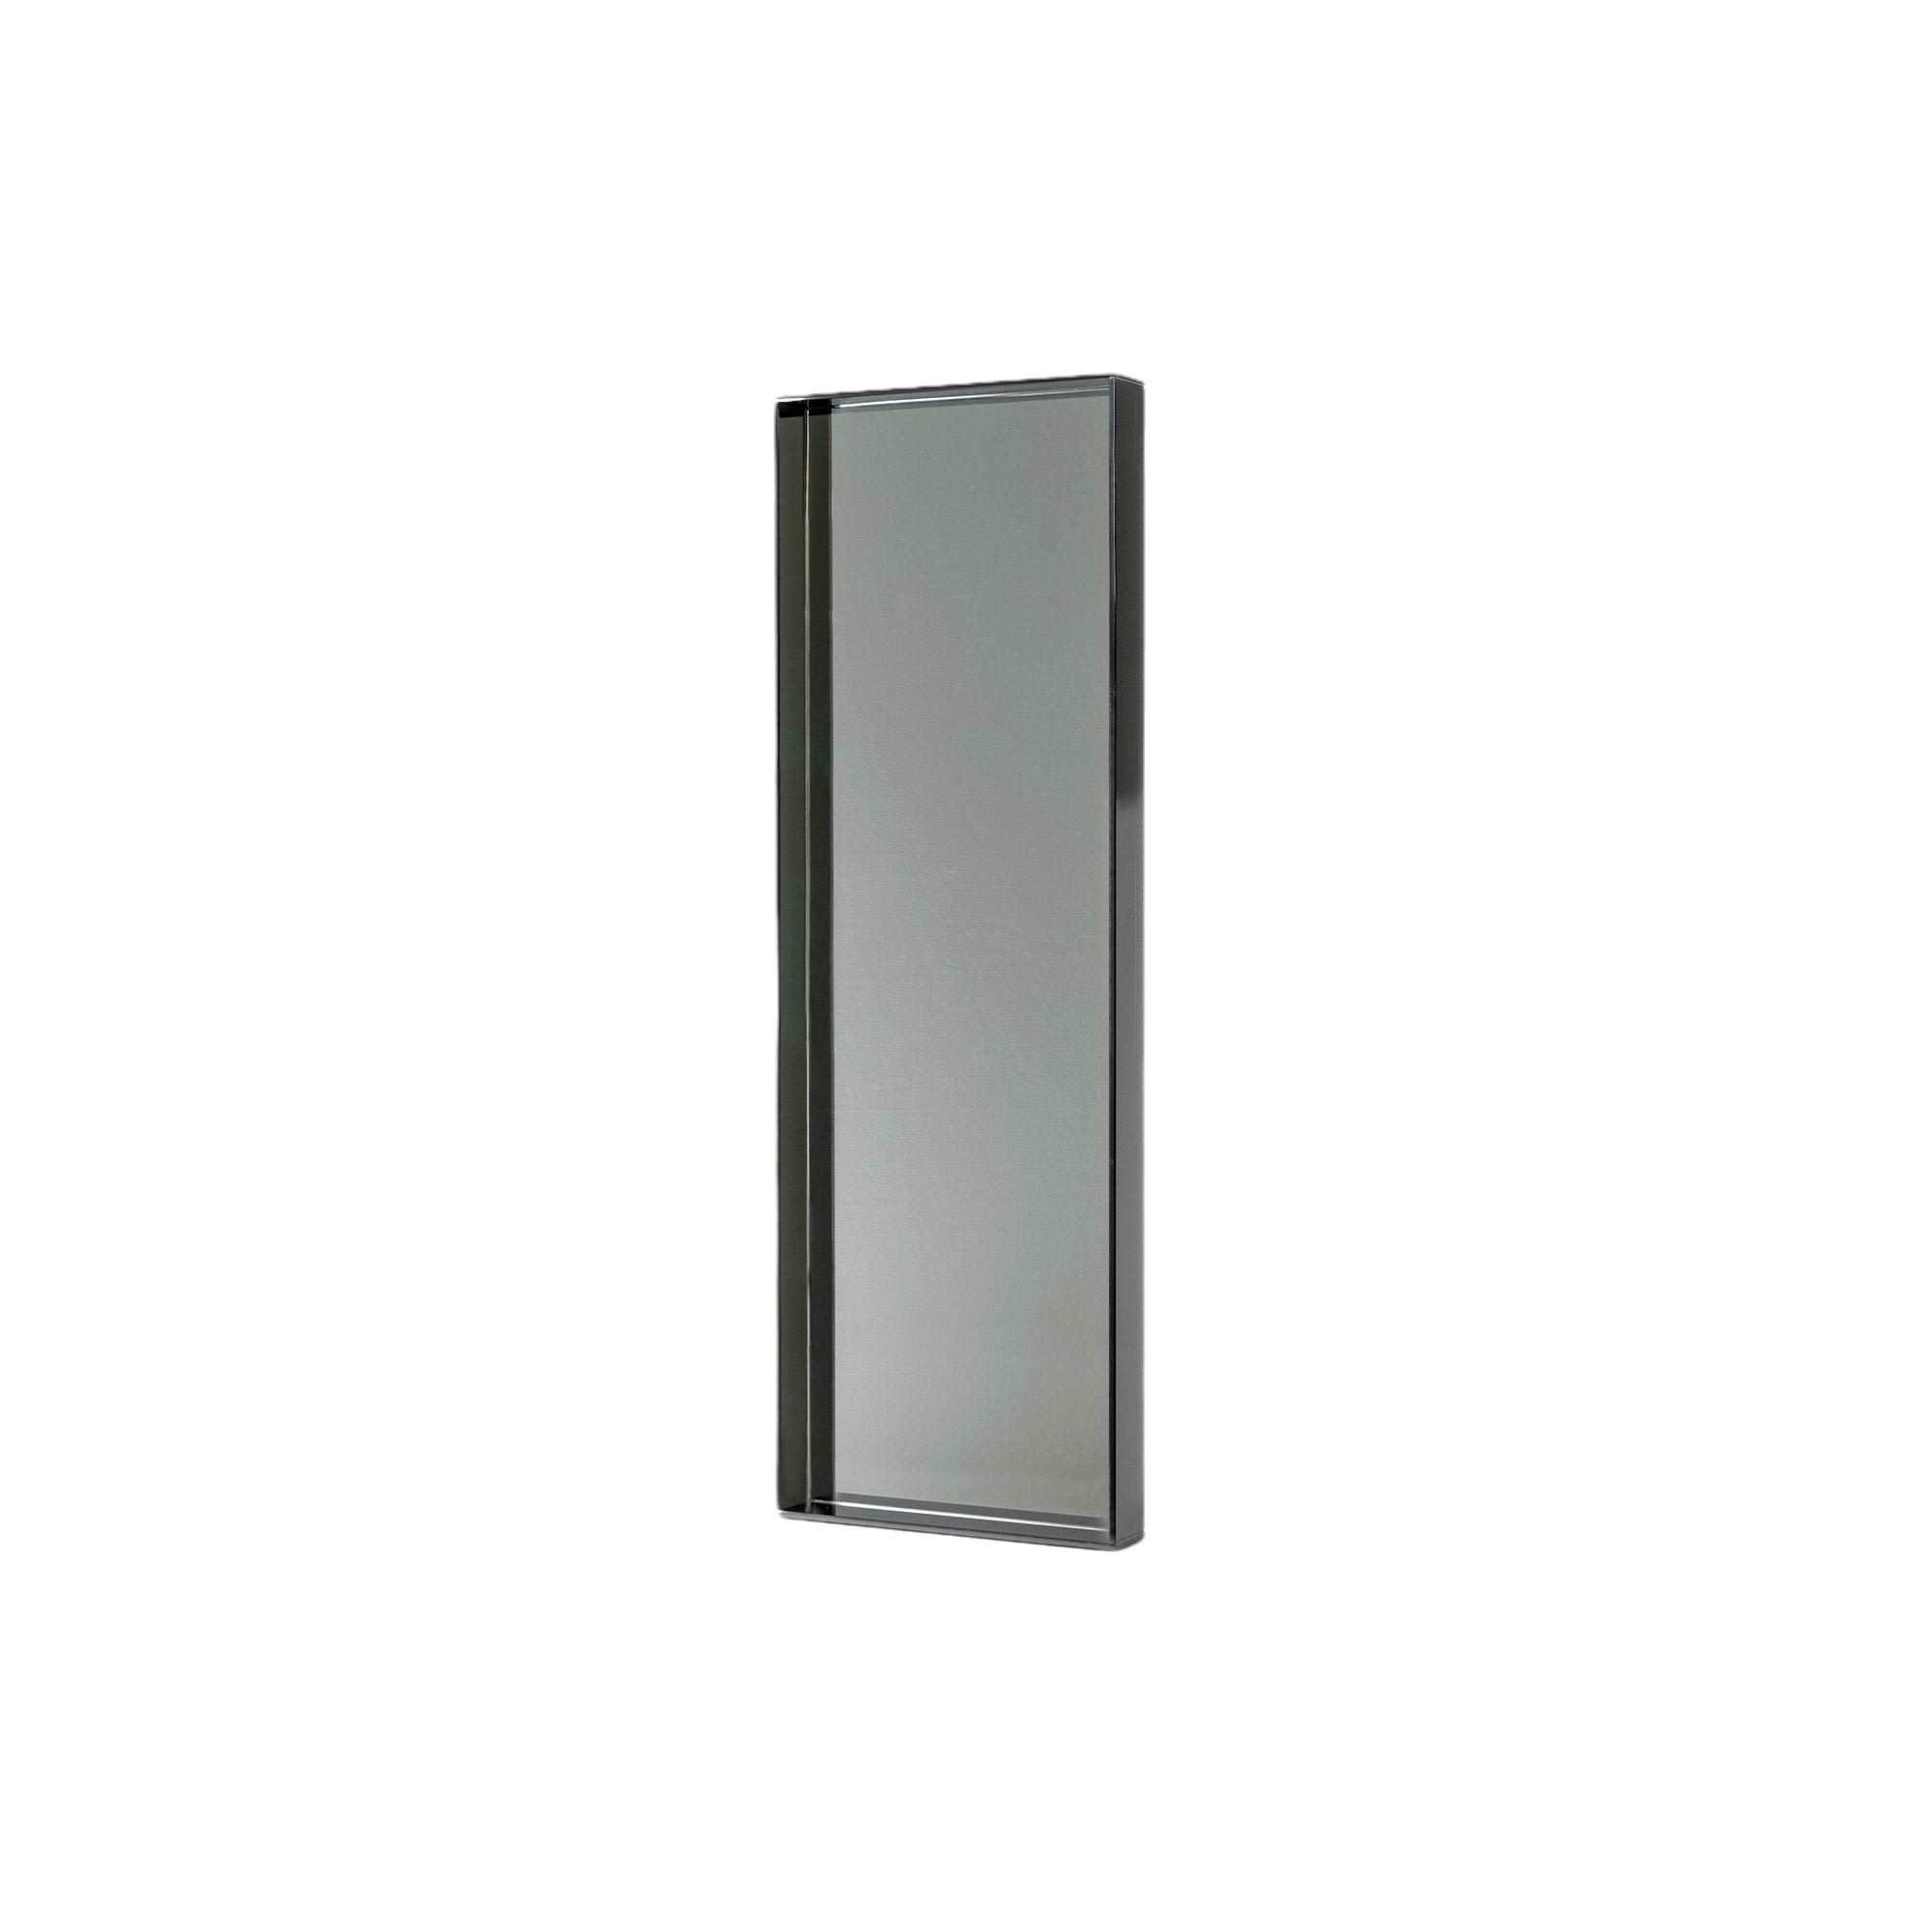 Lucent Tall Mirror - THAT COOL LIVING